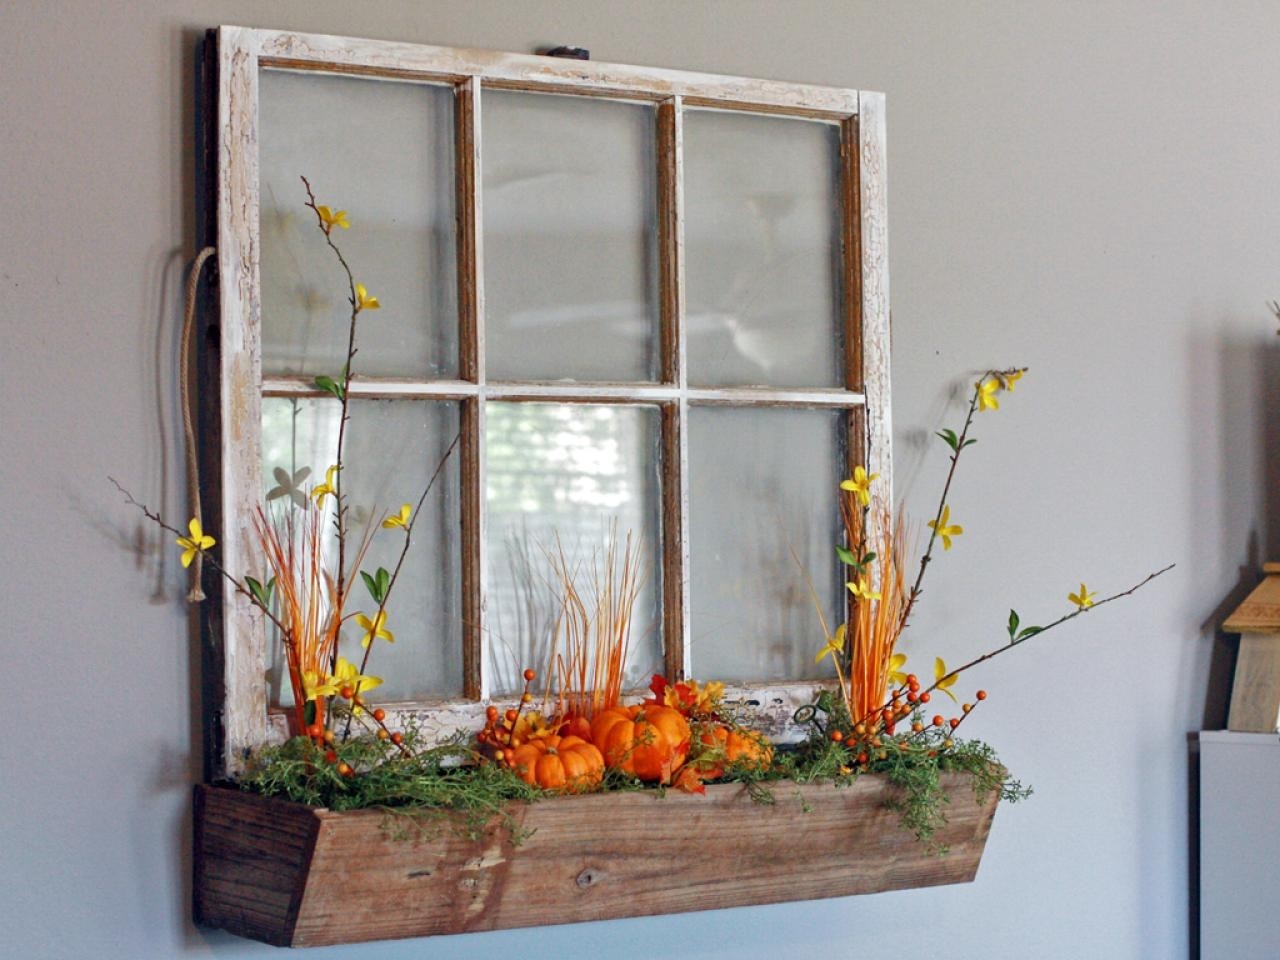 Window box perfect to add a touch of fall to